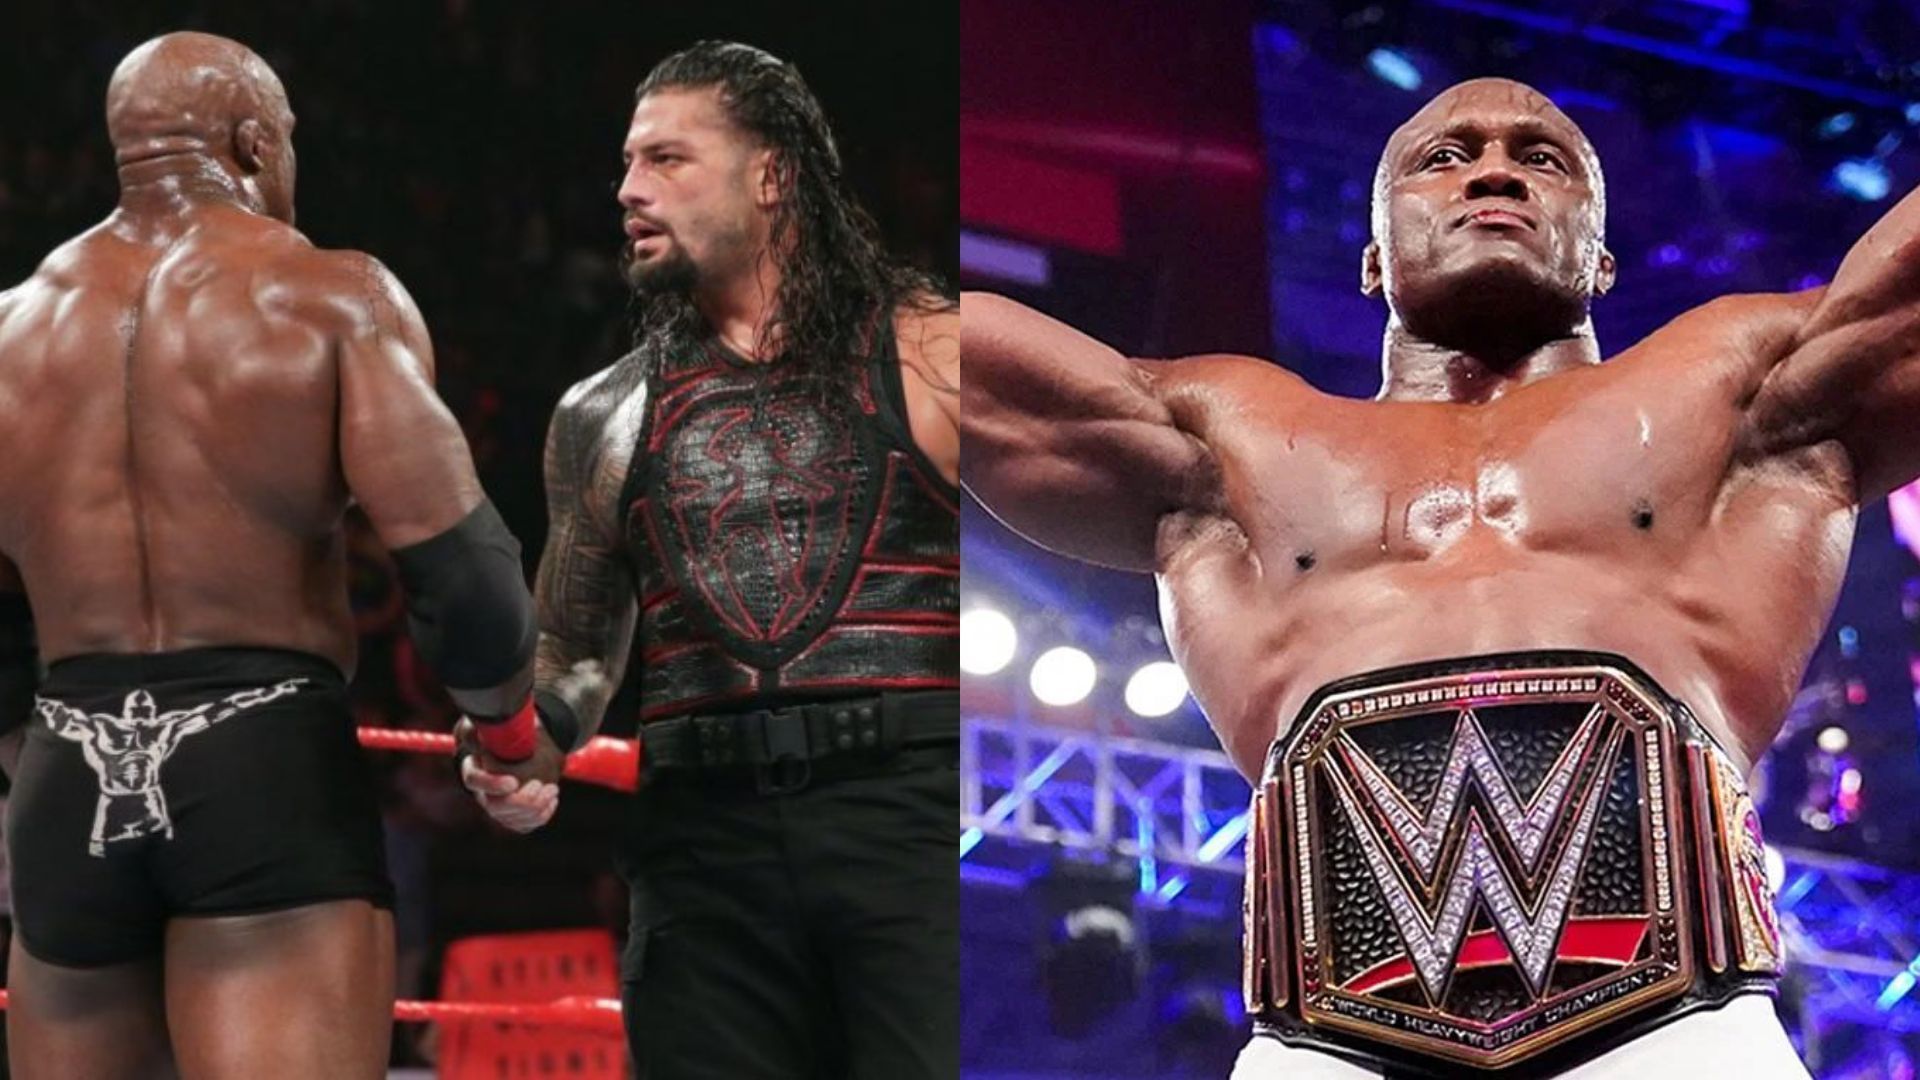 Bobby Lashley has a compelling case for a world championship match